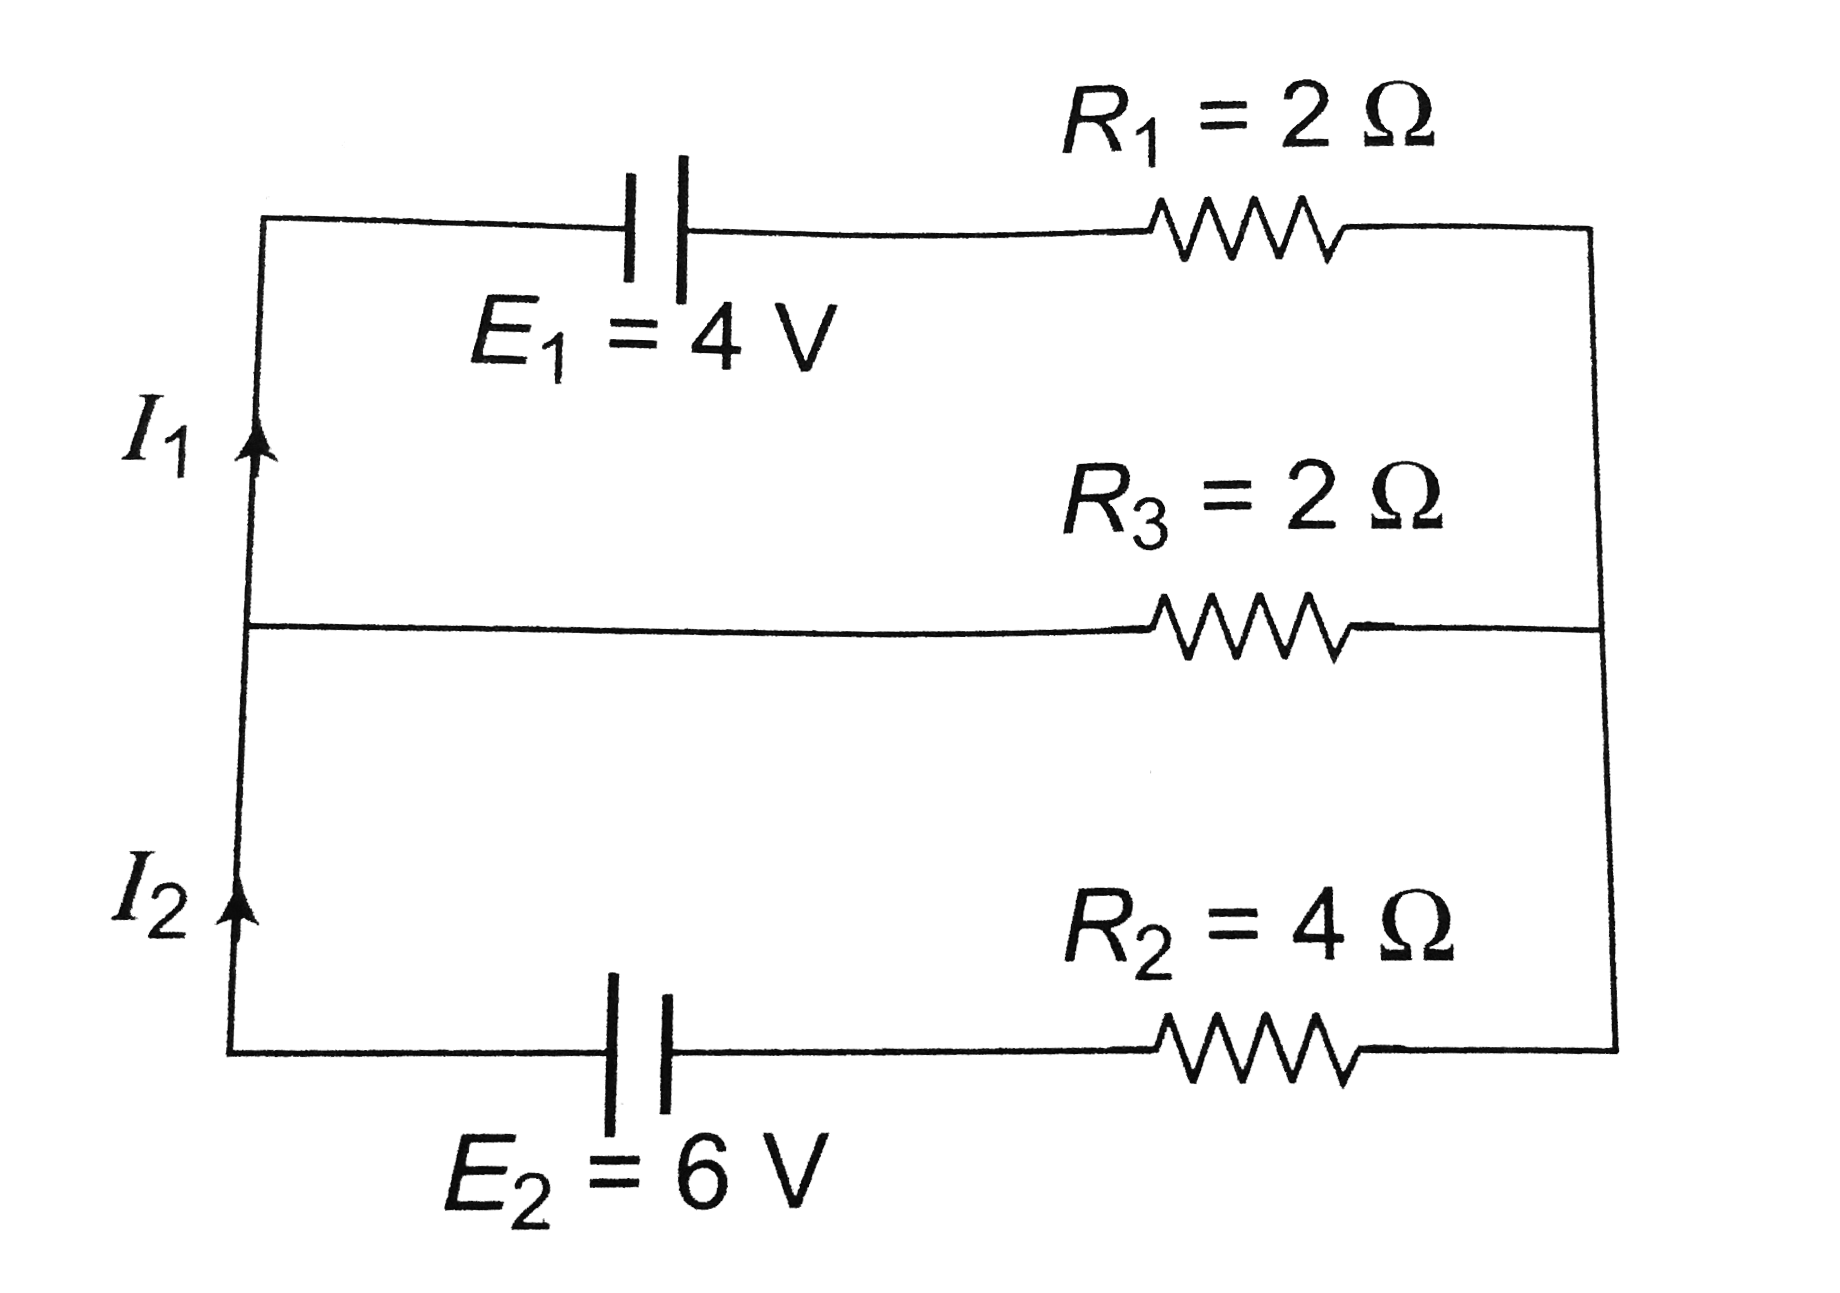 In the circuit shown below E(1) = 4.0 V, R(1) = 2 Omega, E(2) = 6.0 V, R(2) = 4 Omega and R(3) = 2 Omega. The current I(1) is